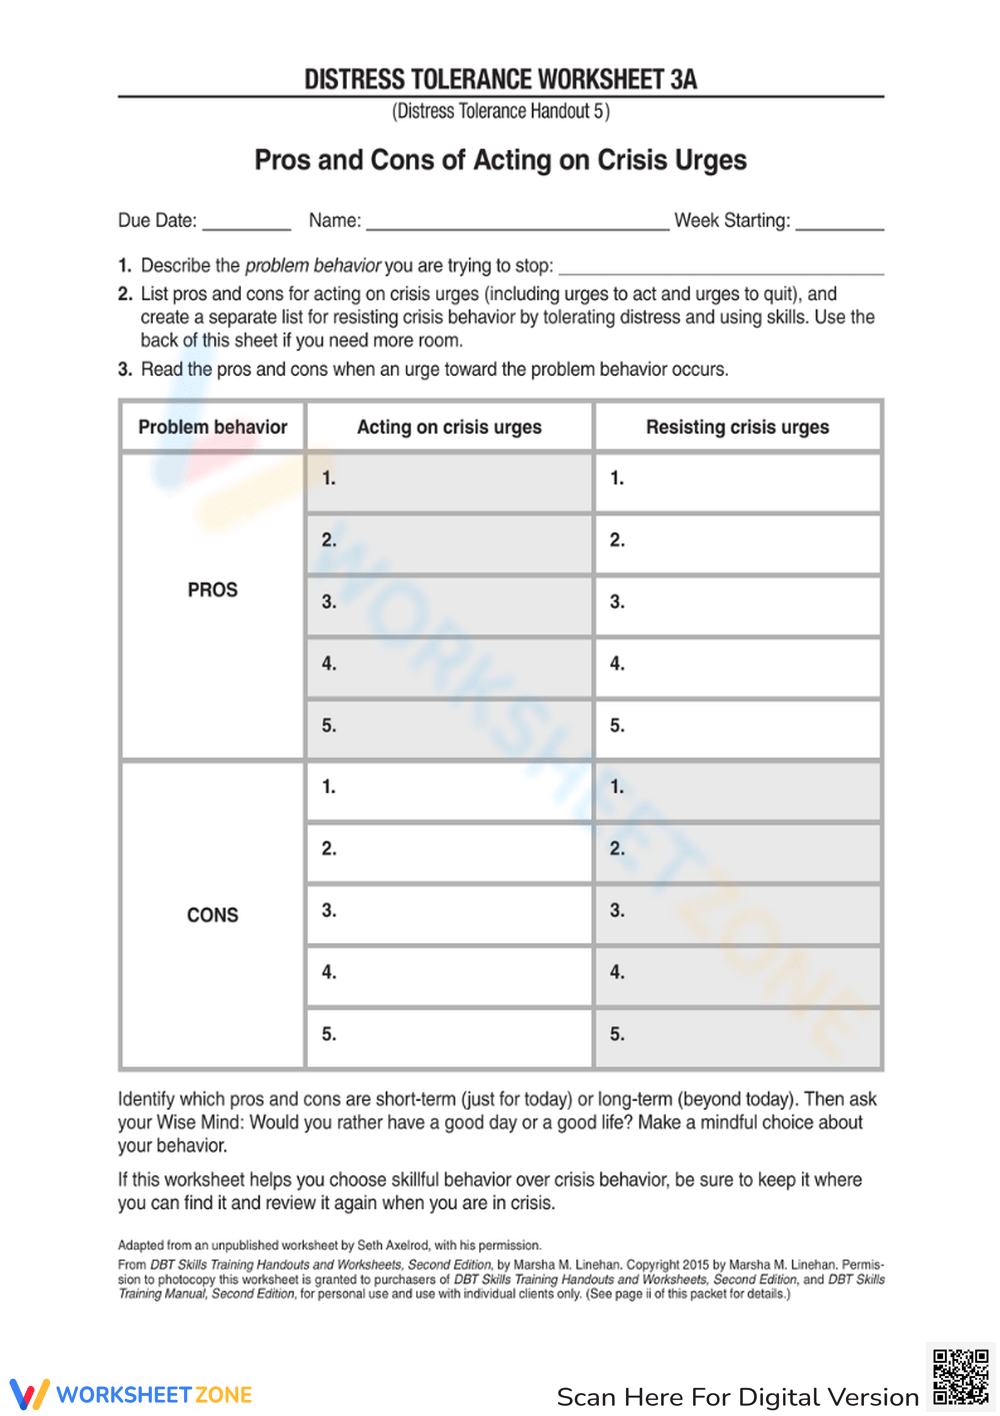 Pros And Cons Of Acting On Crisis Urges Worksheet